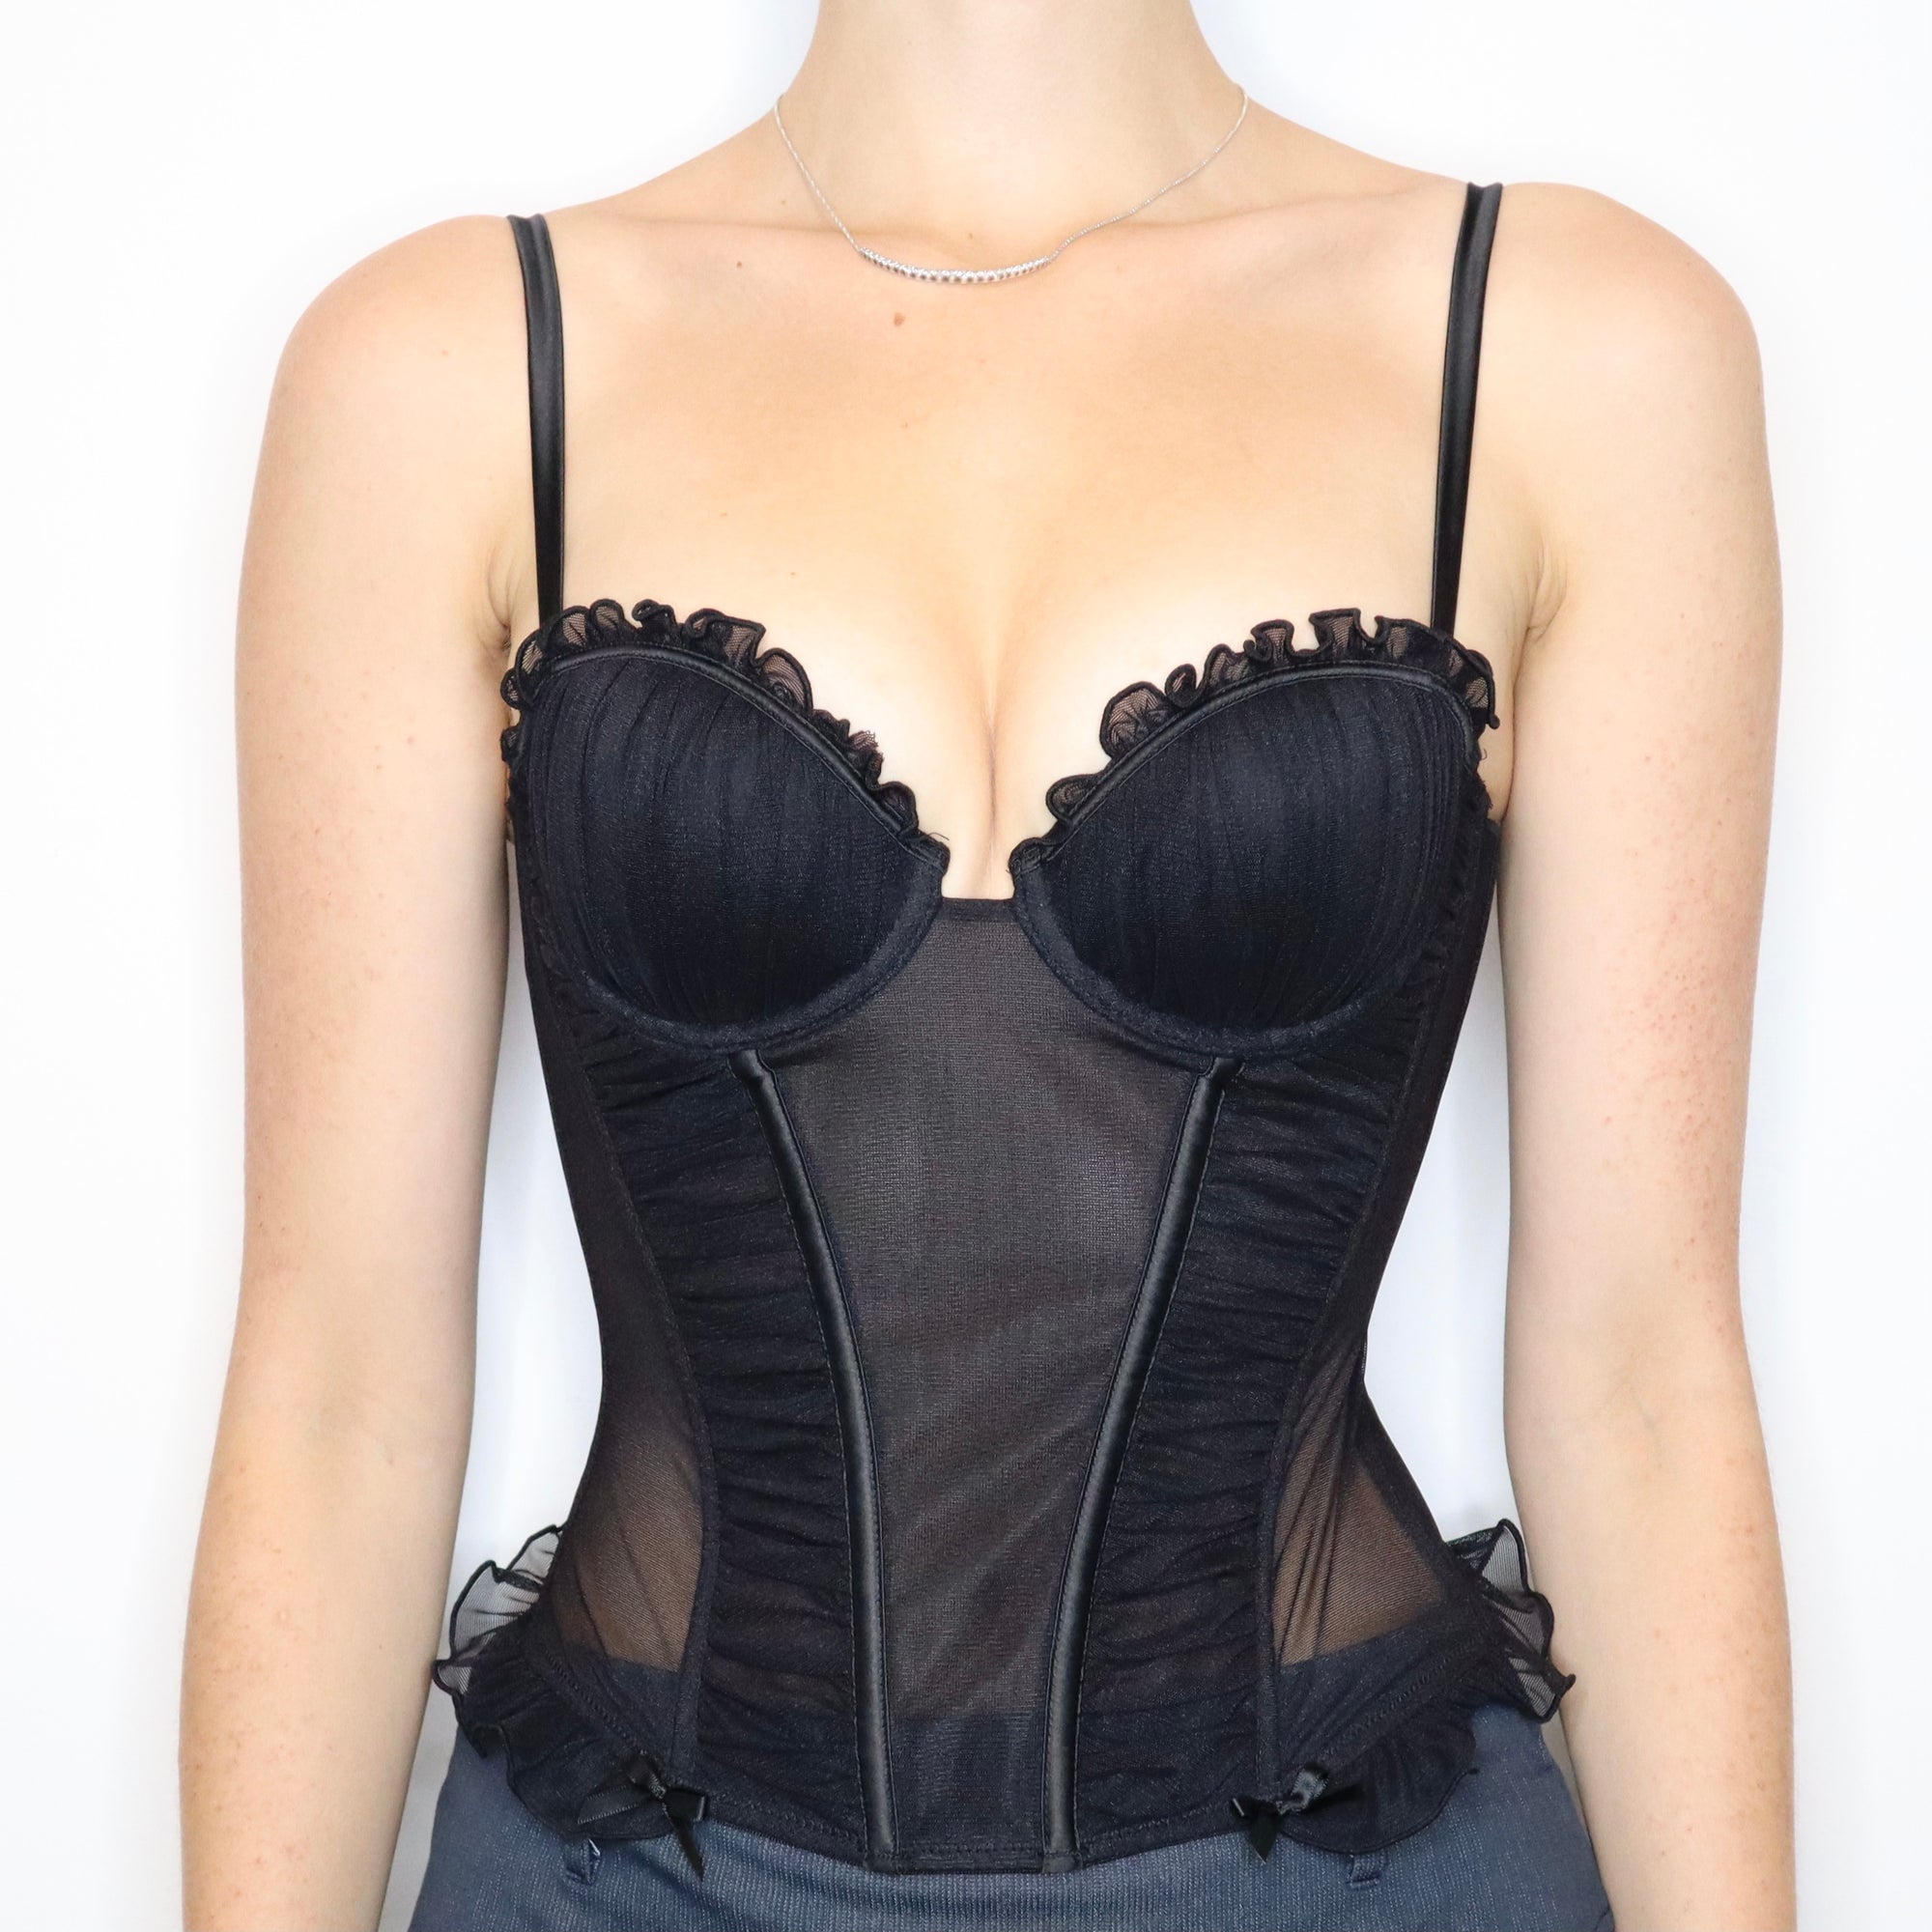 Vintage Early 2000s Black Ruched Mesh Bustier